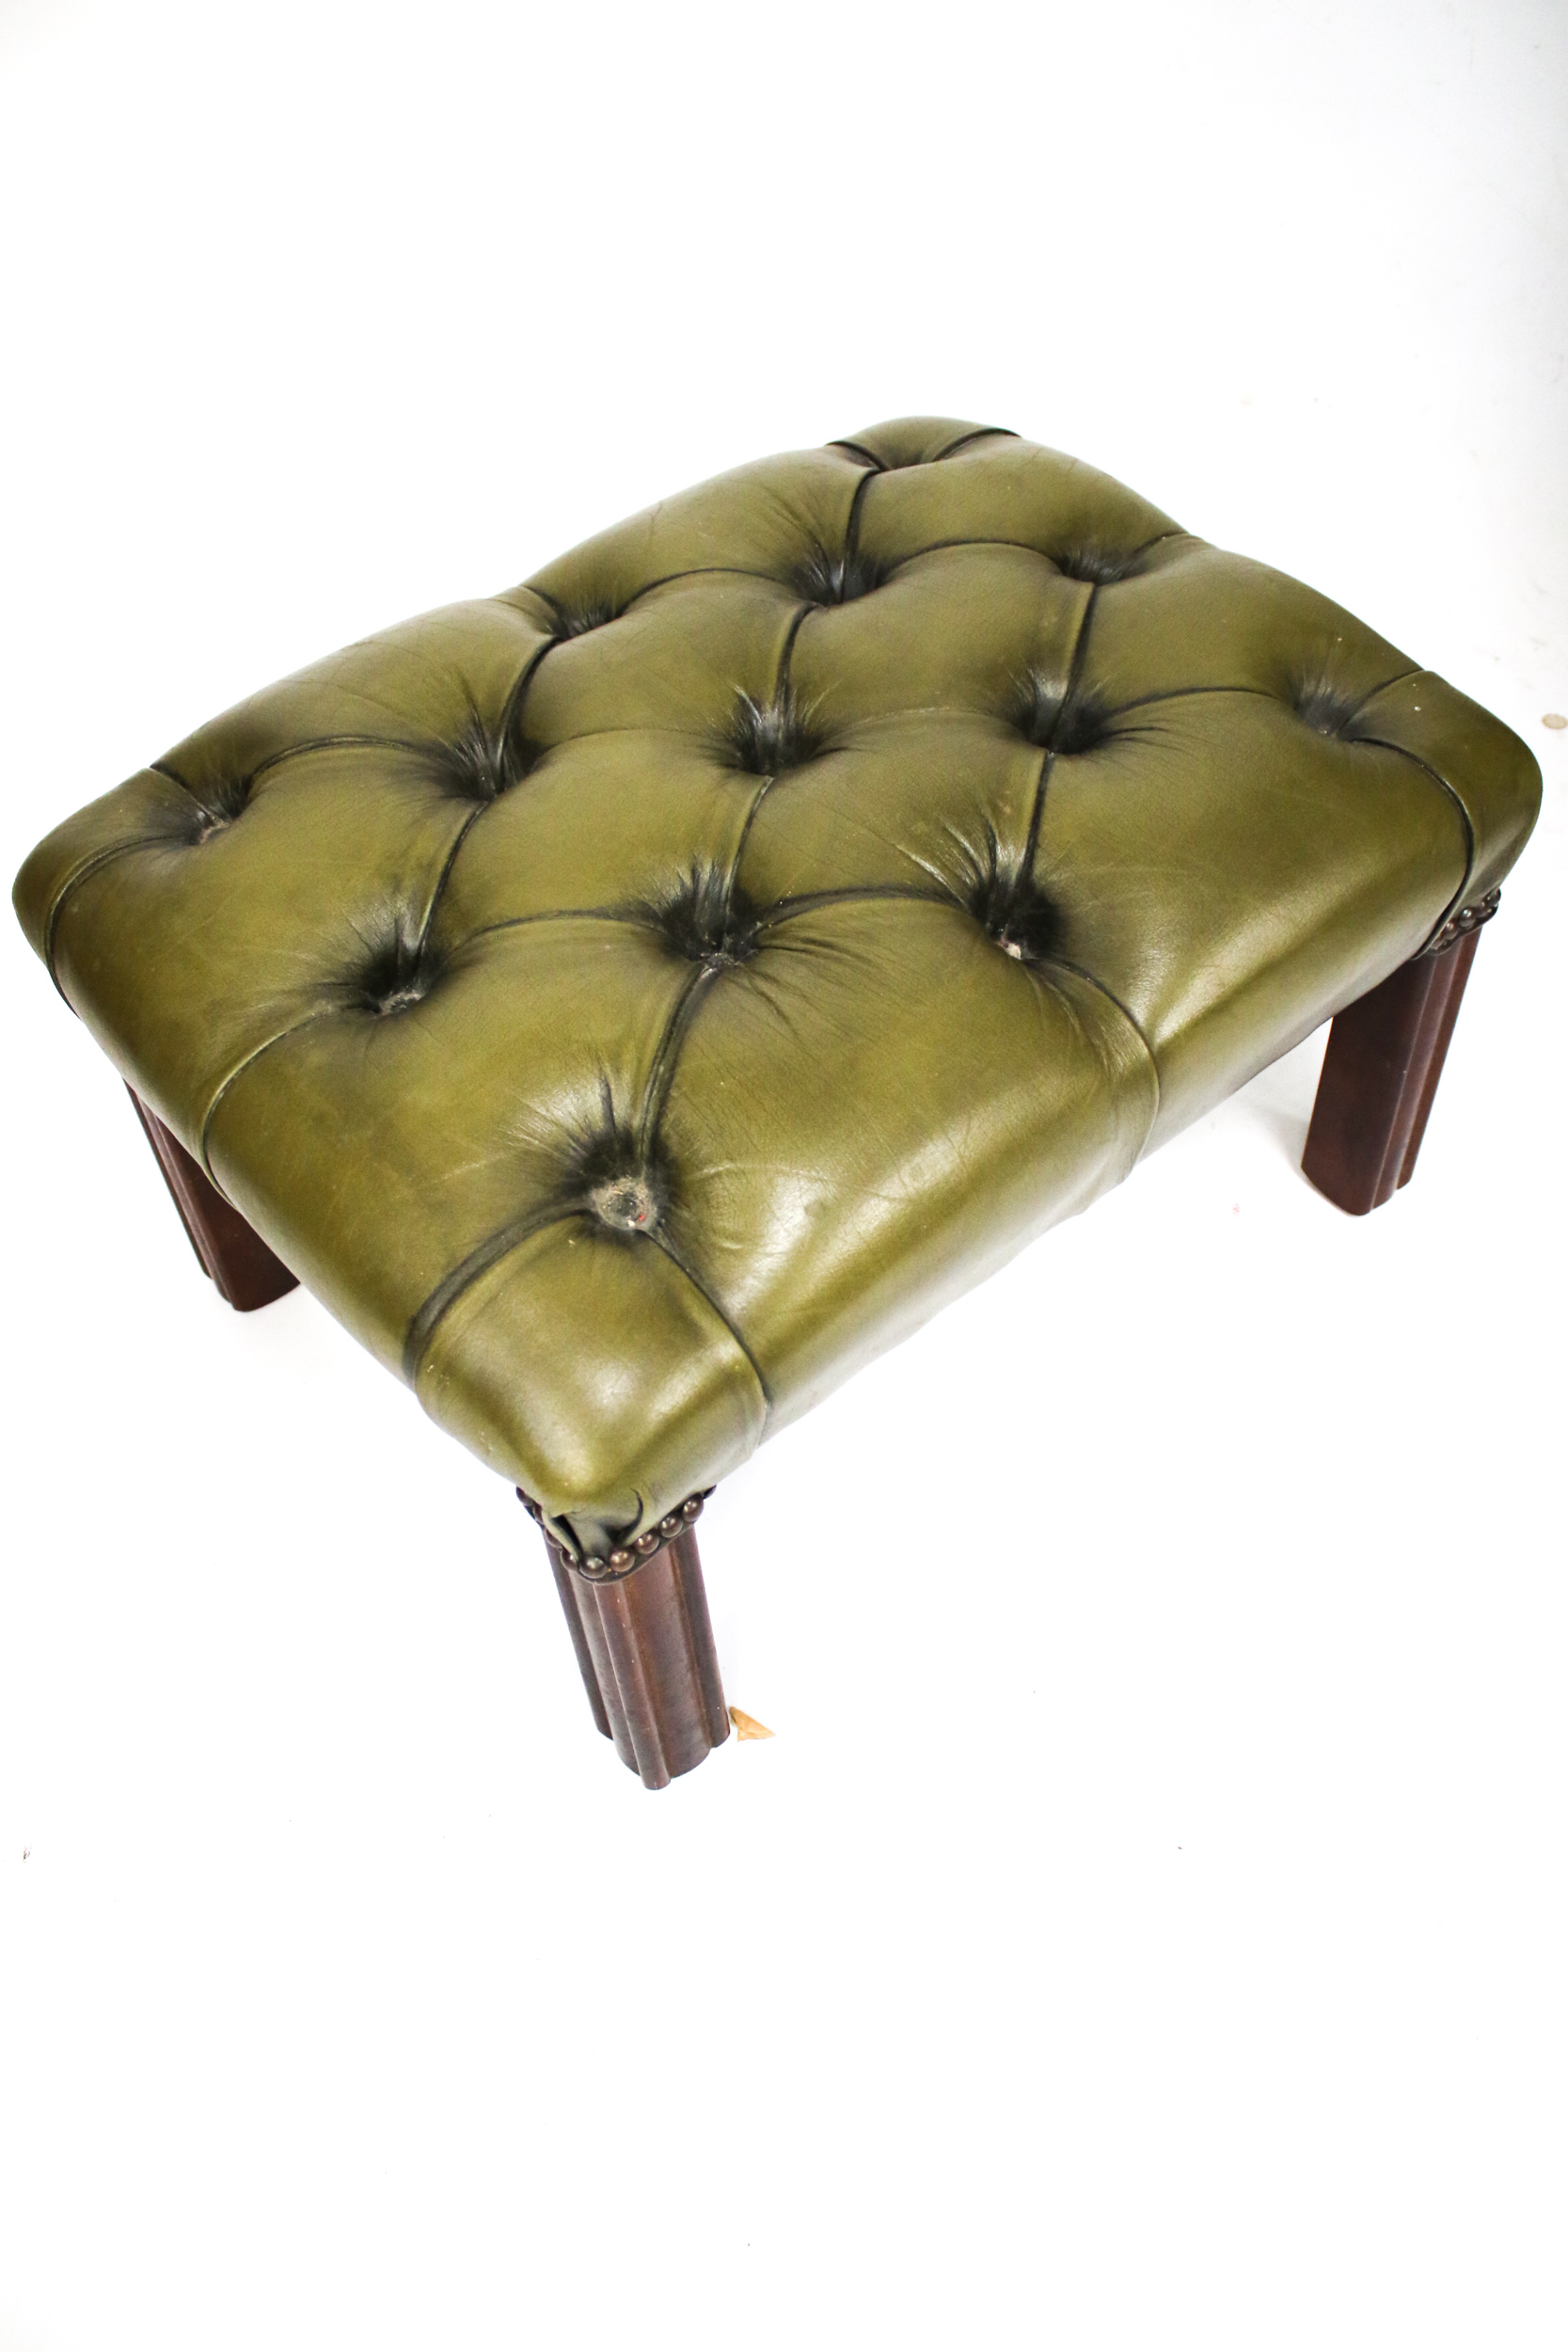 A 20th century Georgian Style green leather button back upholstered wing back armchair and - Image 3 of 3